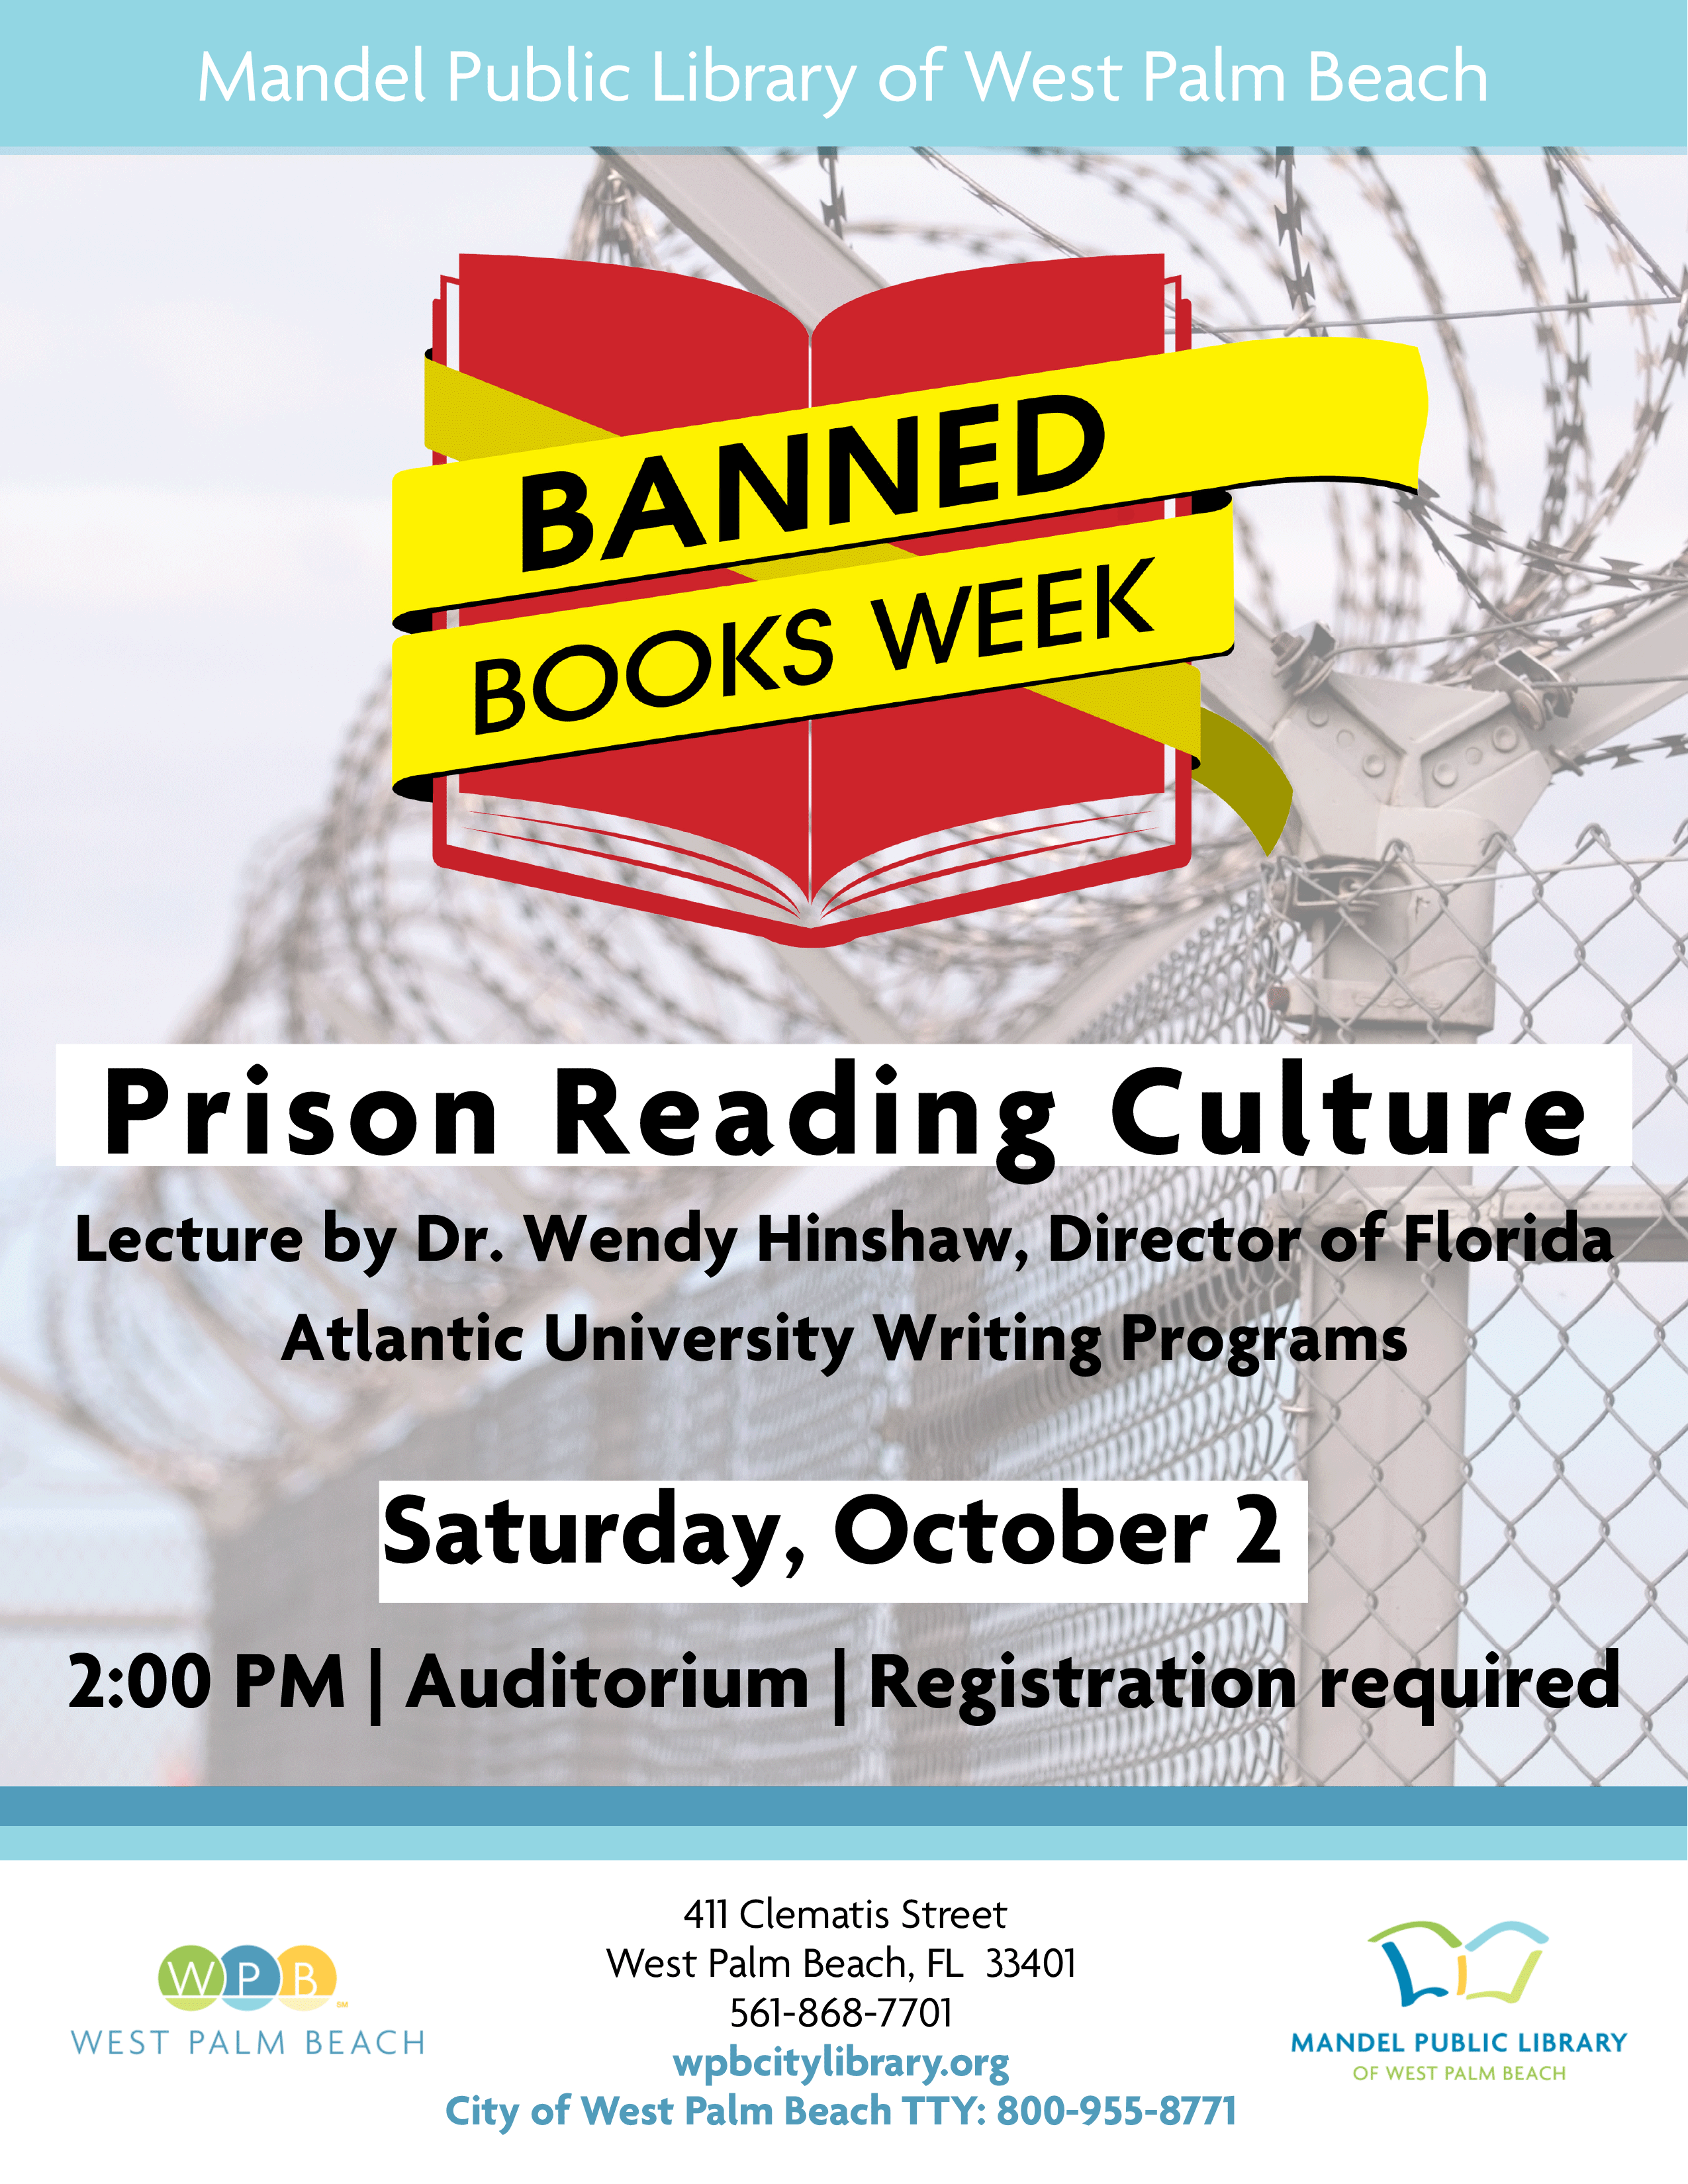 Prision Reading Culture Lecture Flyer